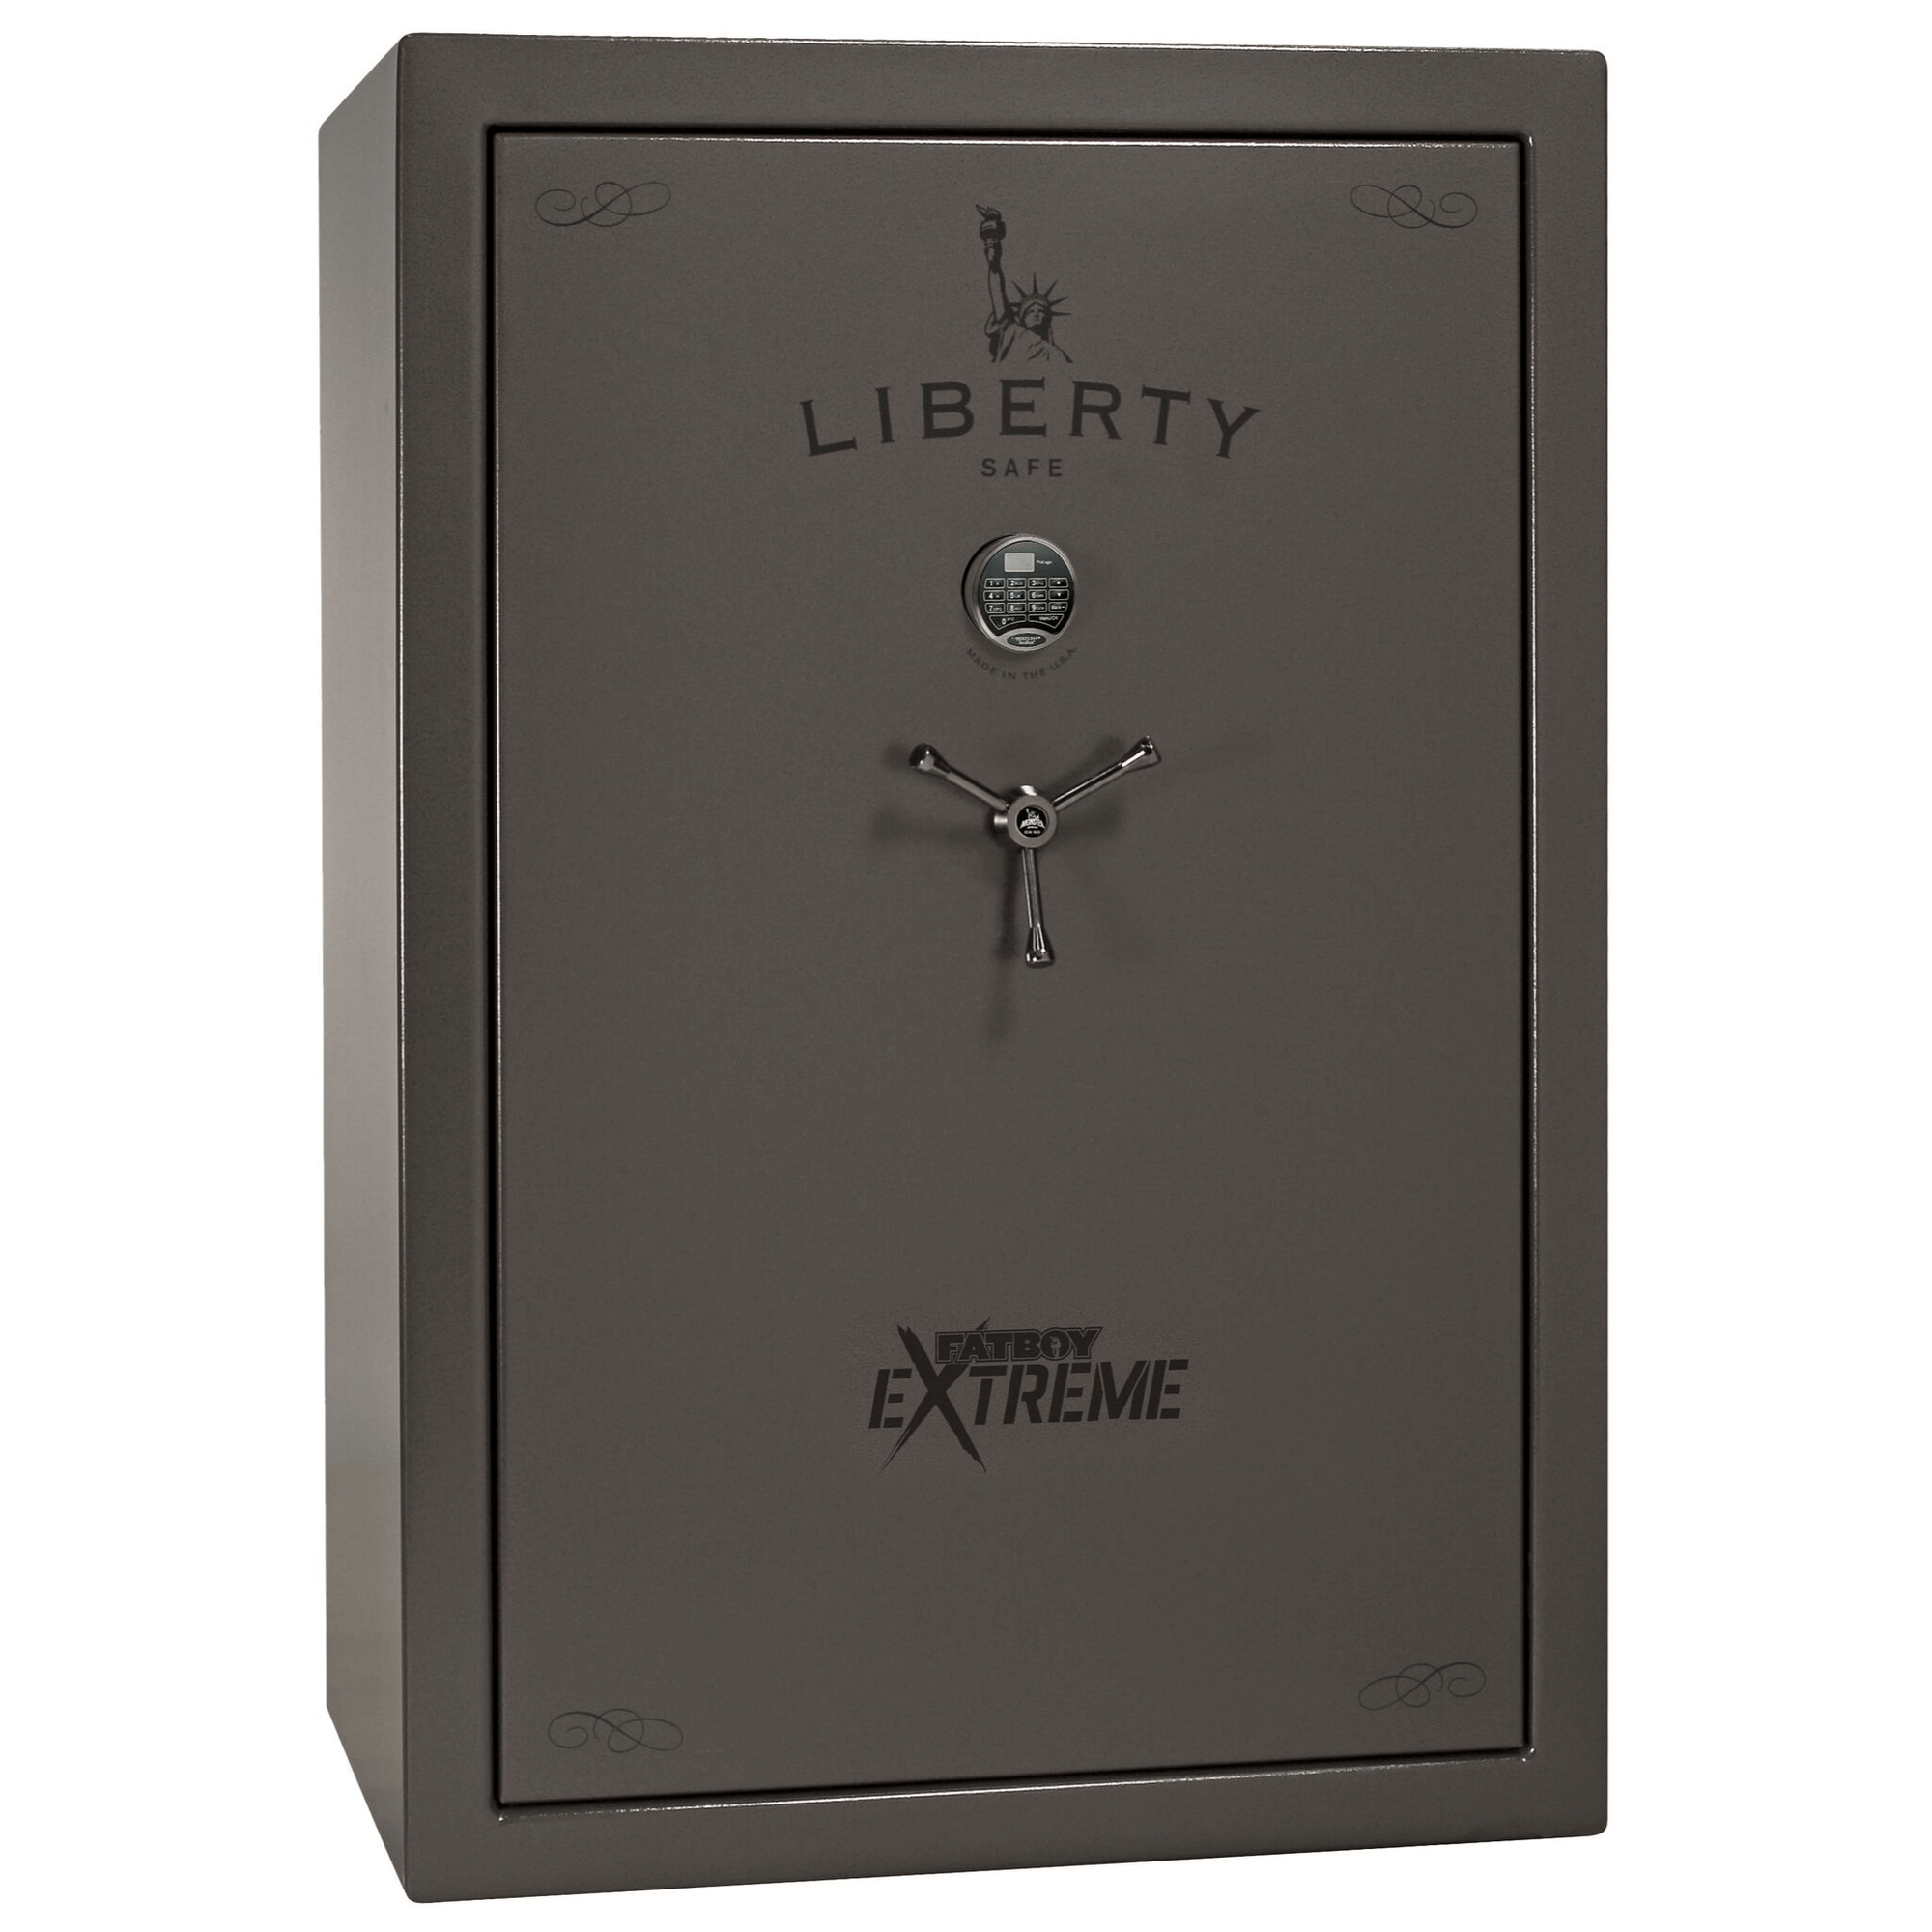 Fatboy Extreme | Gray | Level 5 Security | 110 Minute Fire Protection | Liberty Safe Norcal.